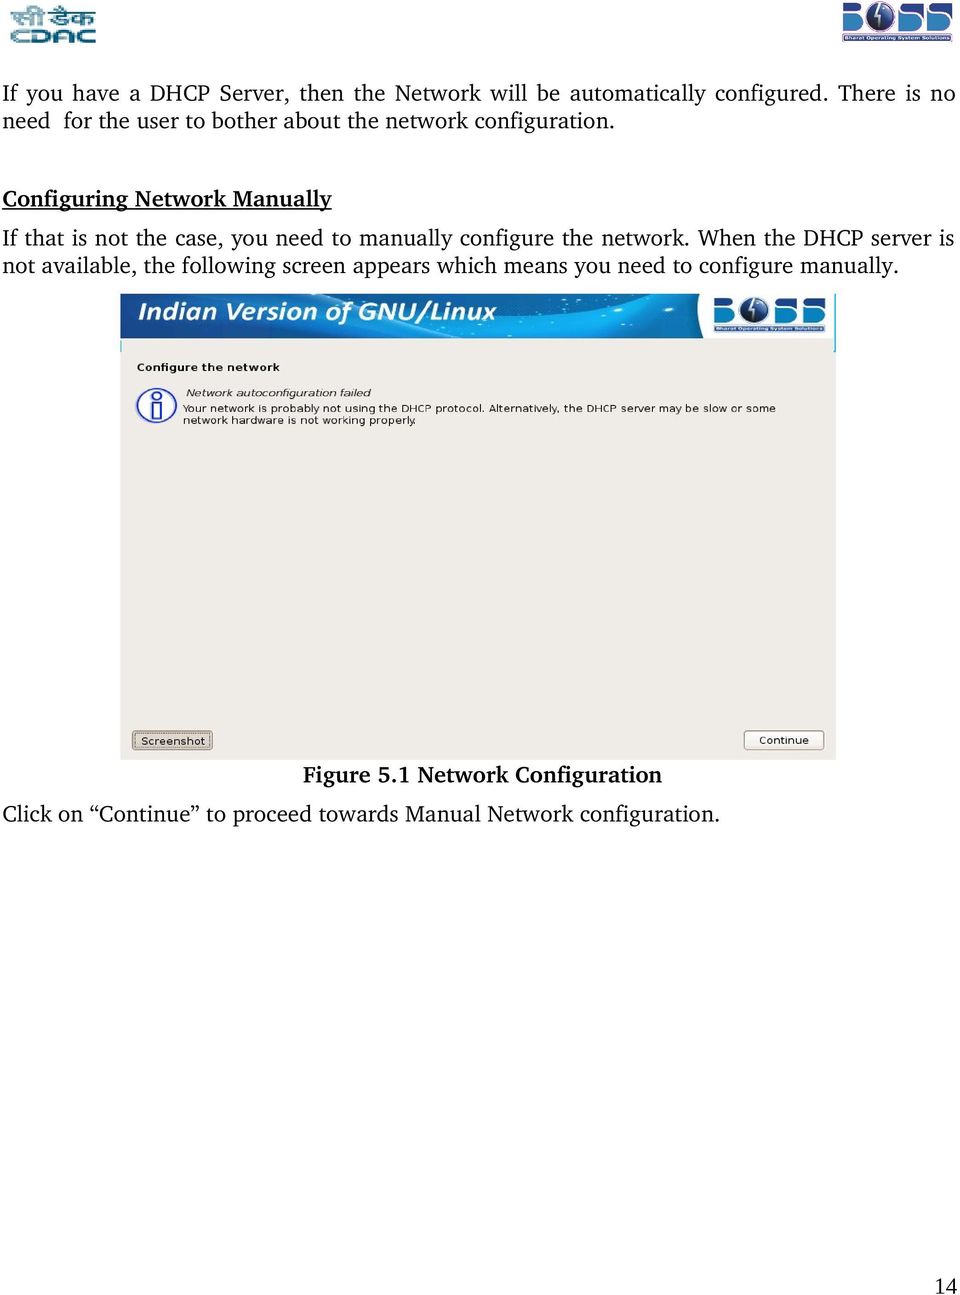 Configuring Network Manually If that is not the case, you need to manually configure the network.